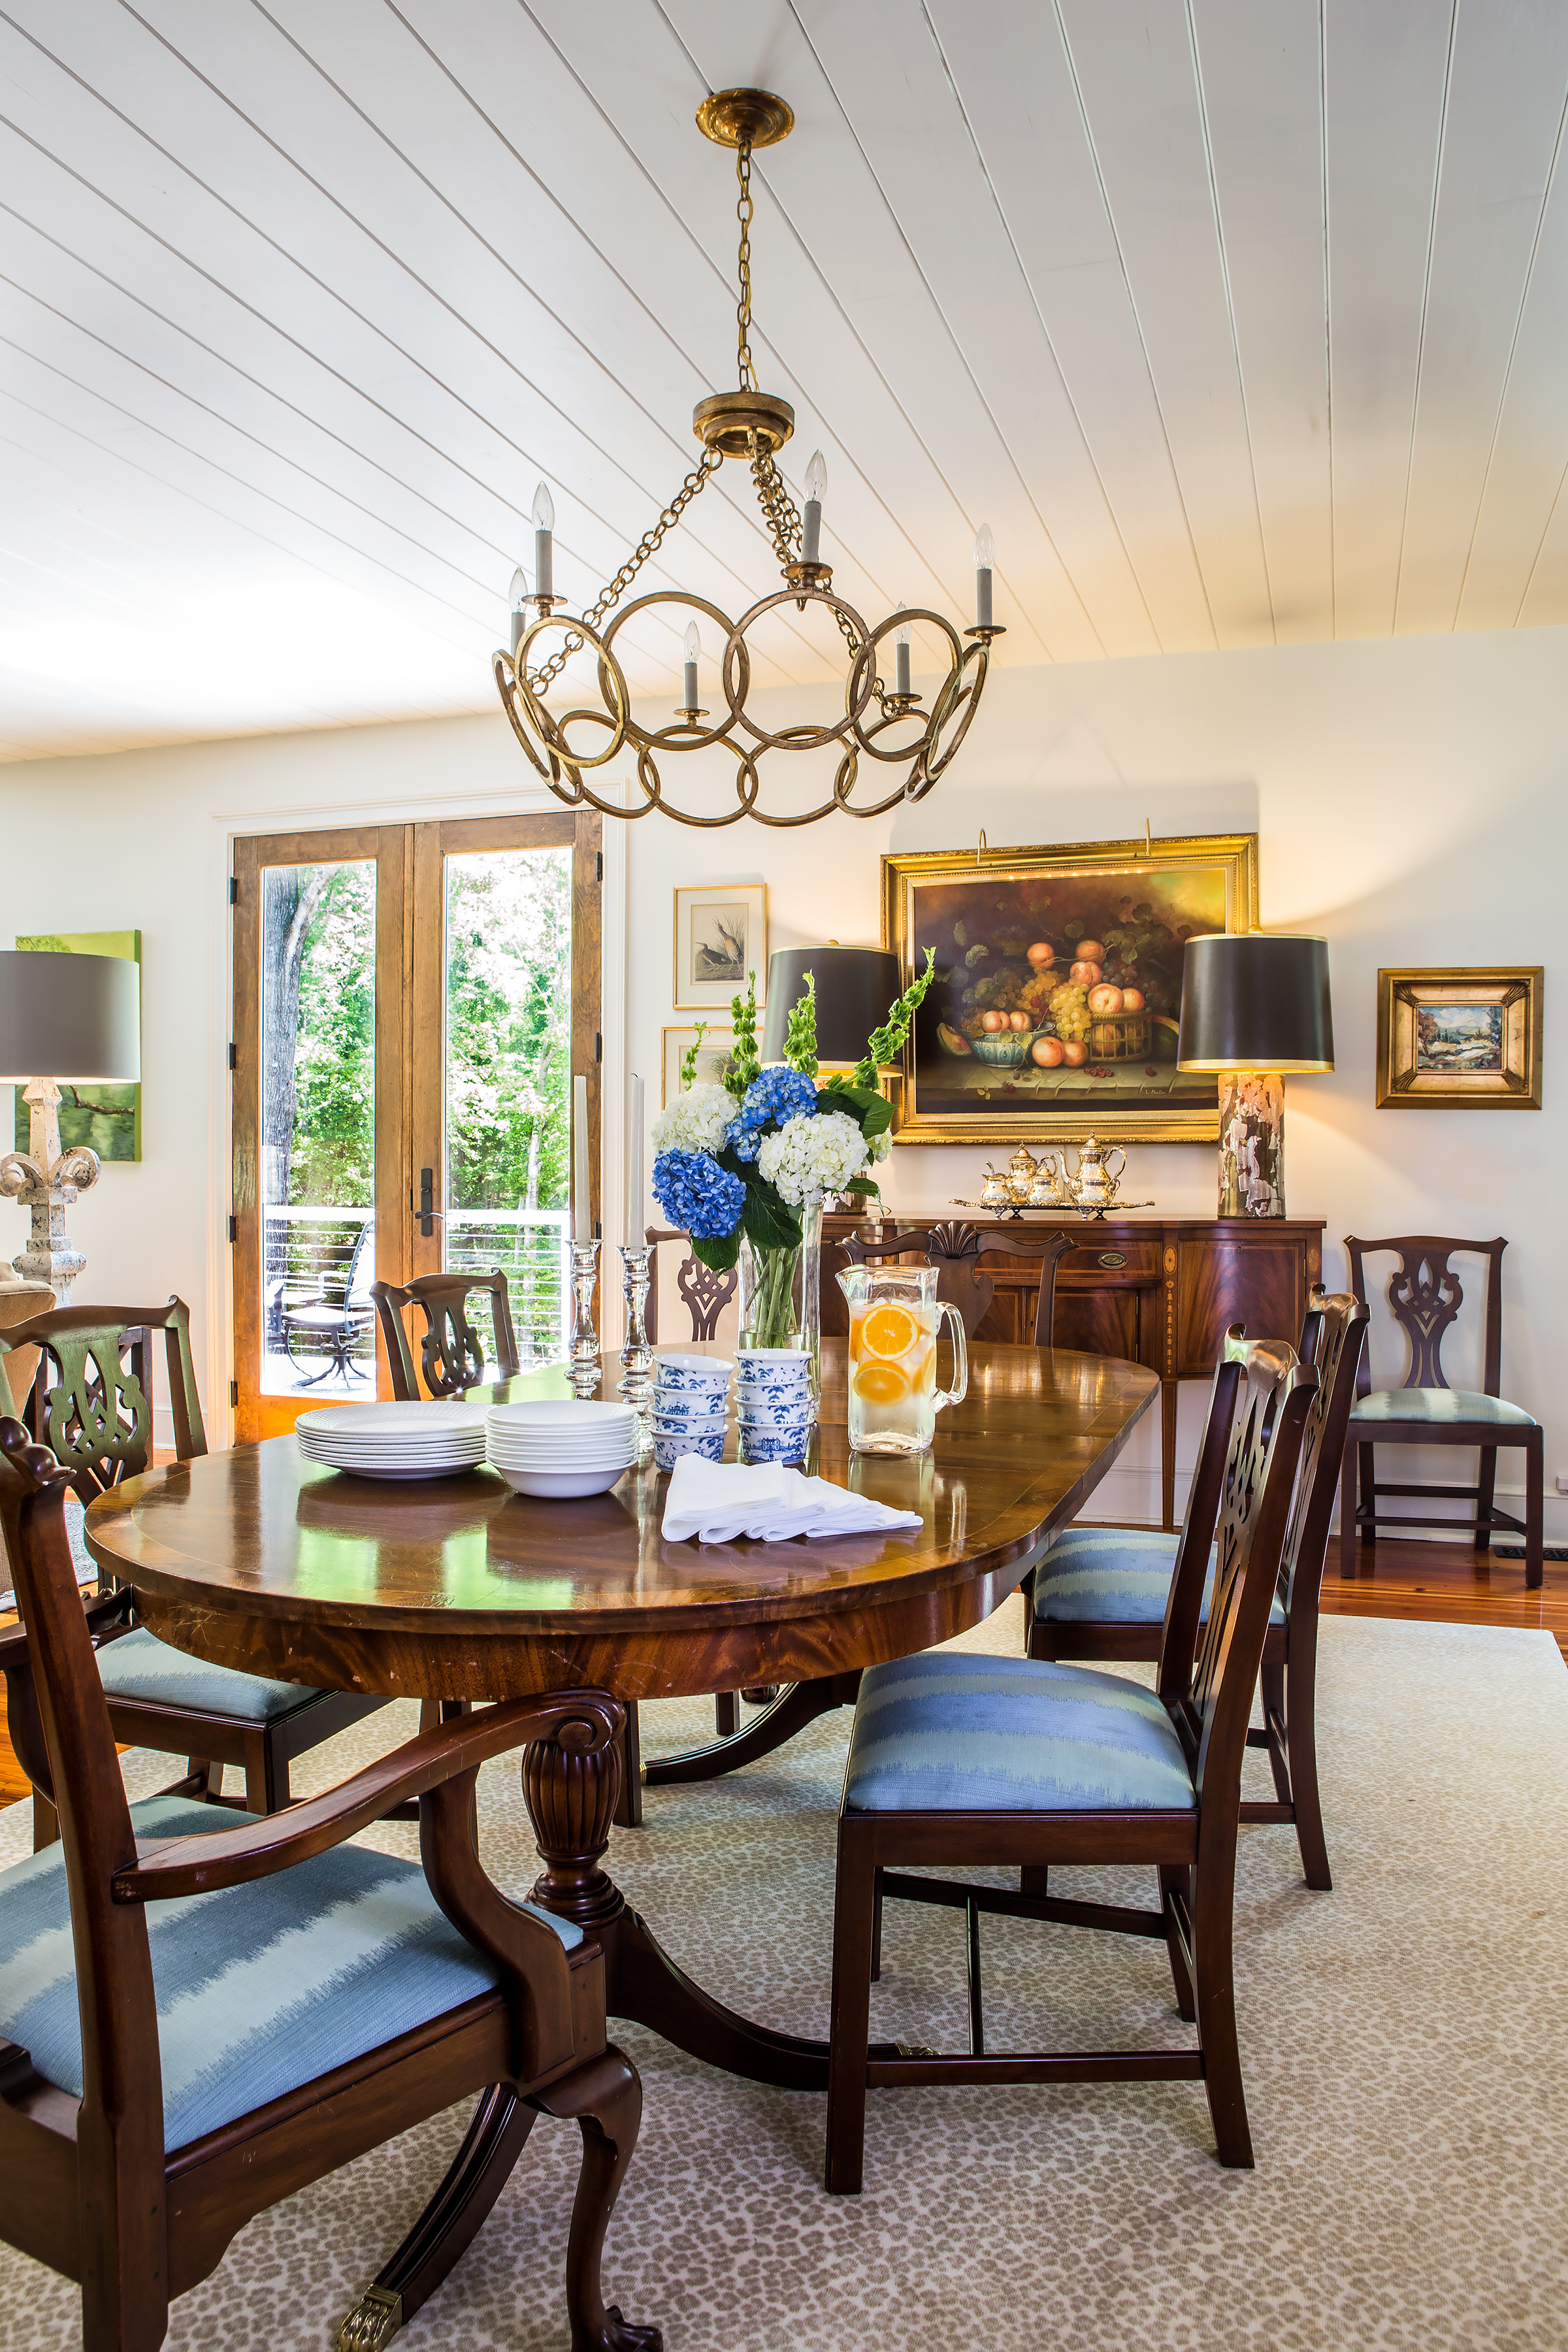 An original wet bar was transformed into the central dining area. An eclectic mix, highlighted with sentimental family pieces, artwork, and lamps, are favorites from Juleah’s mother-in-law, Martha Blatt. 